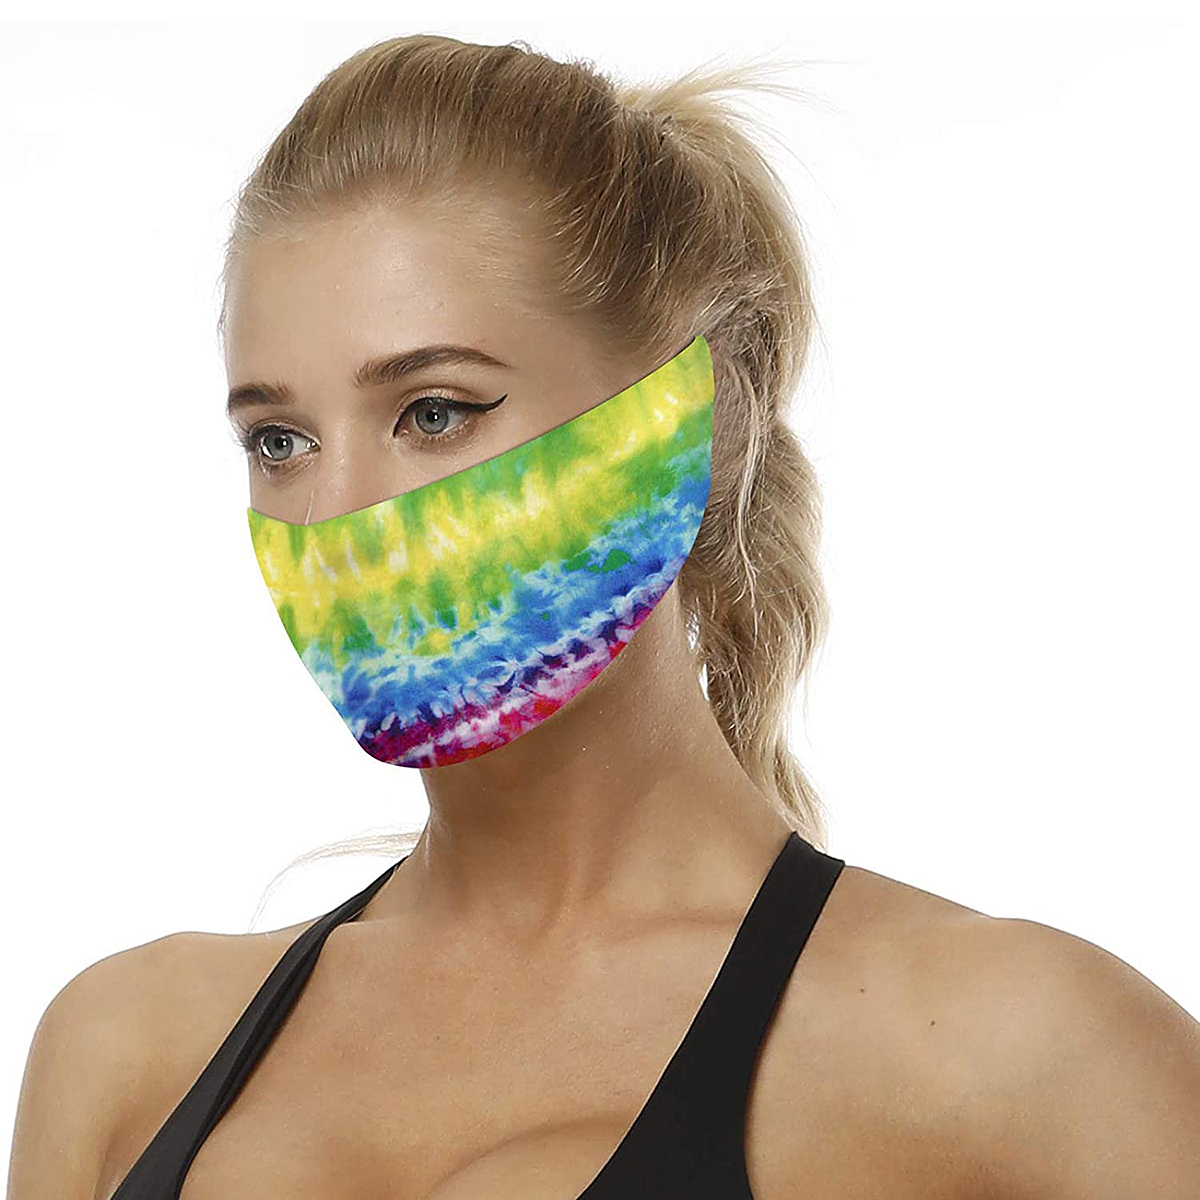 Tie-Dye Face Masks: 5 at Amazon That Let You Skip the Mess